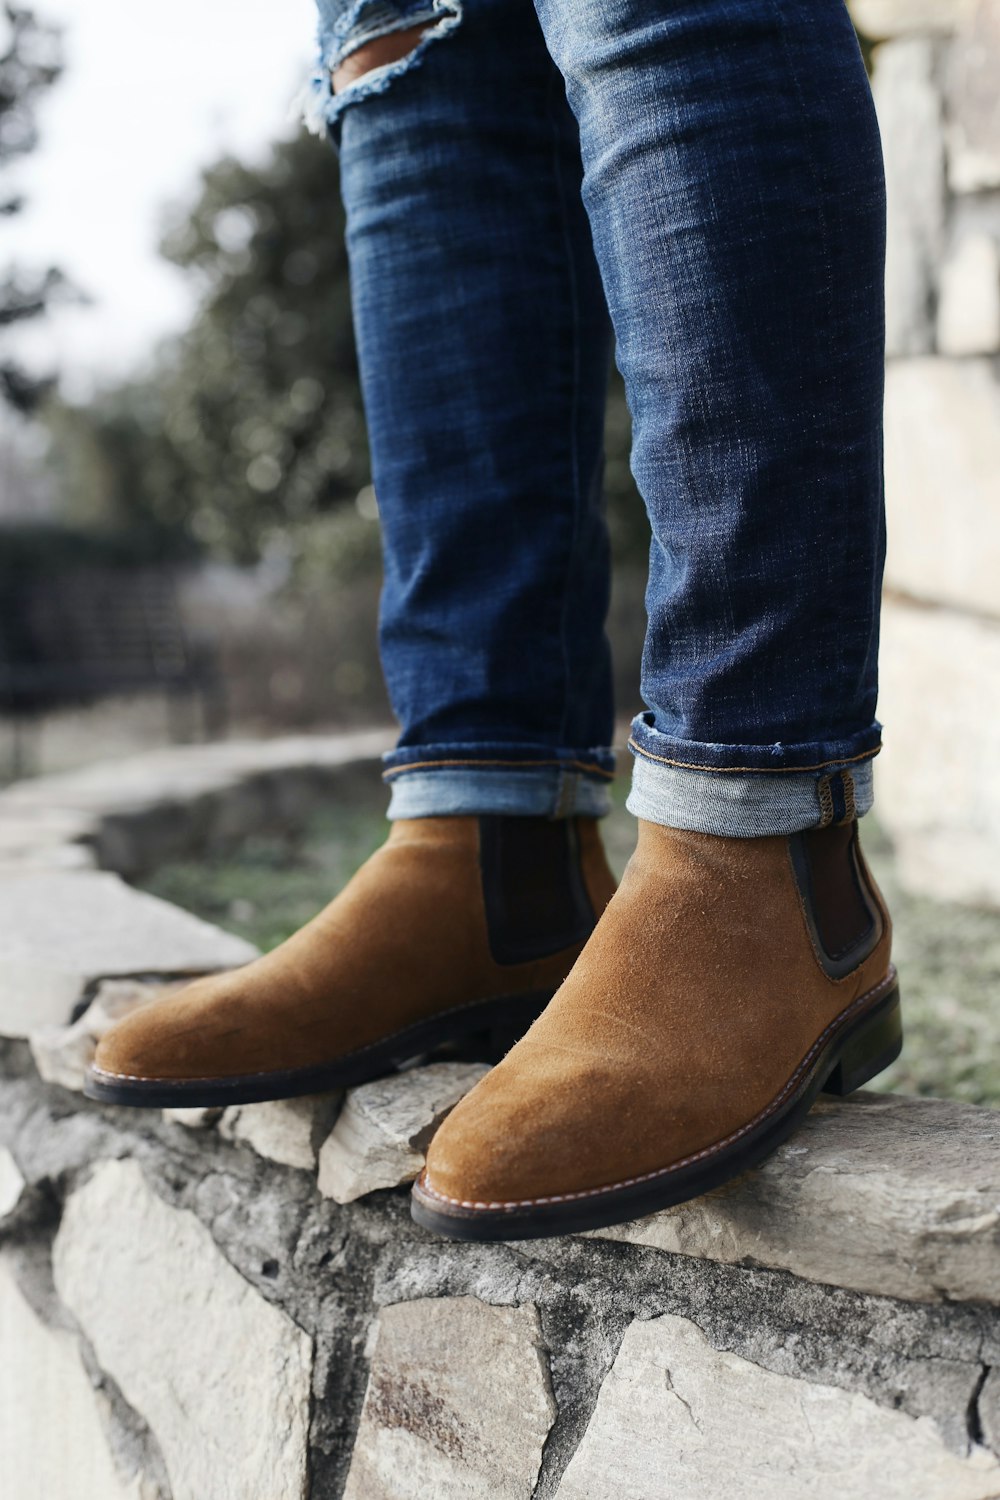 Person pair of brown Chelsea boots photo – Free Clothing Image on